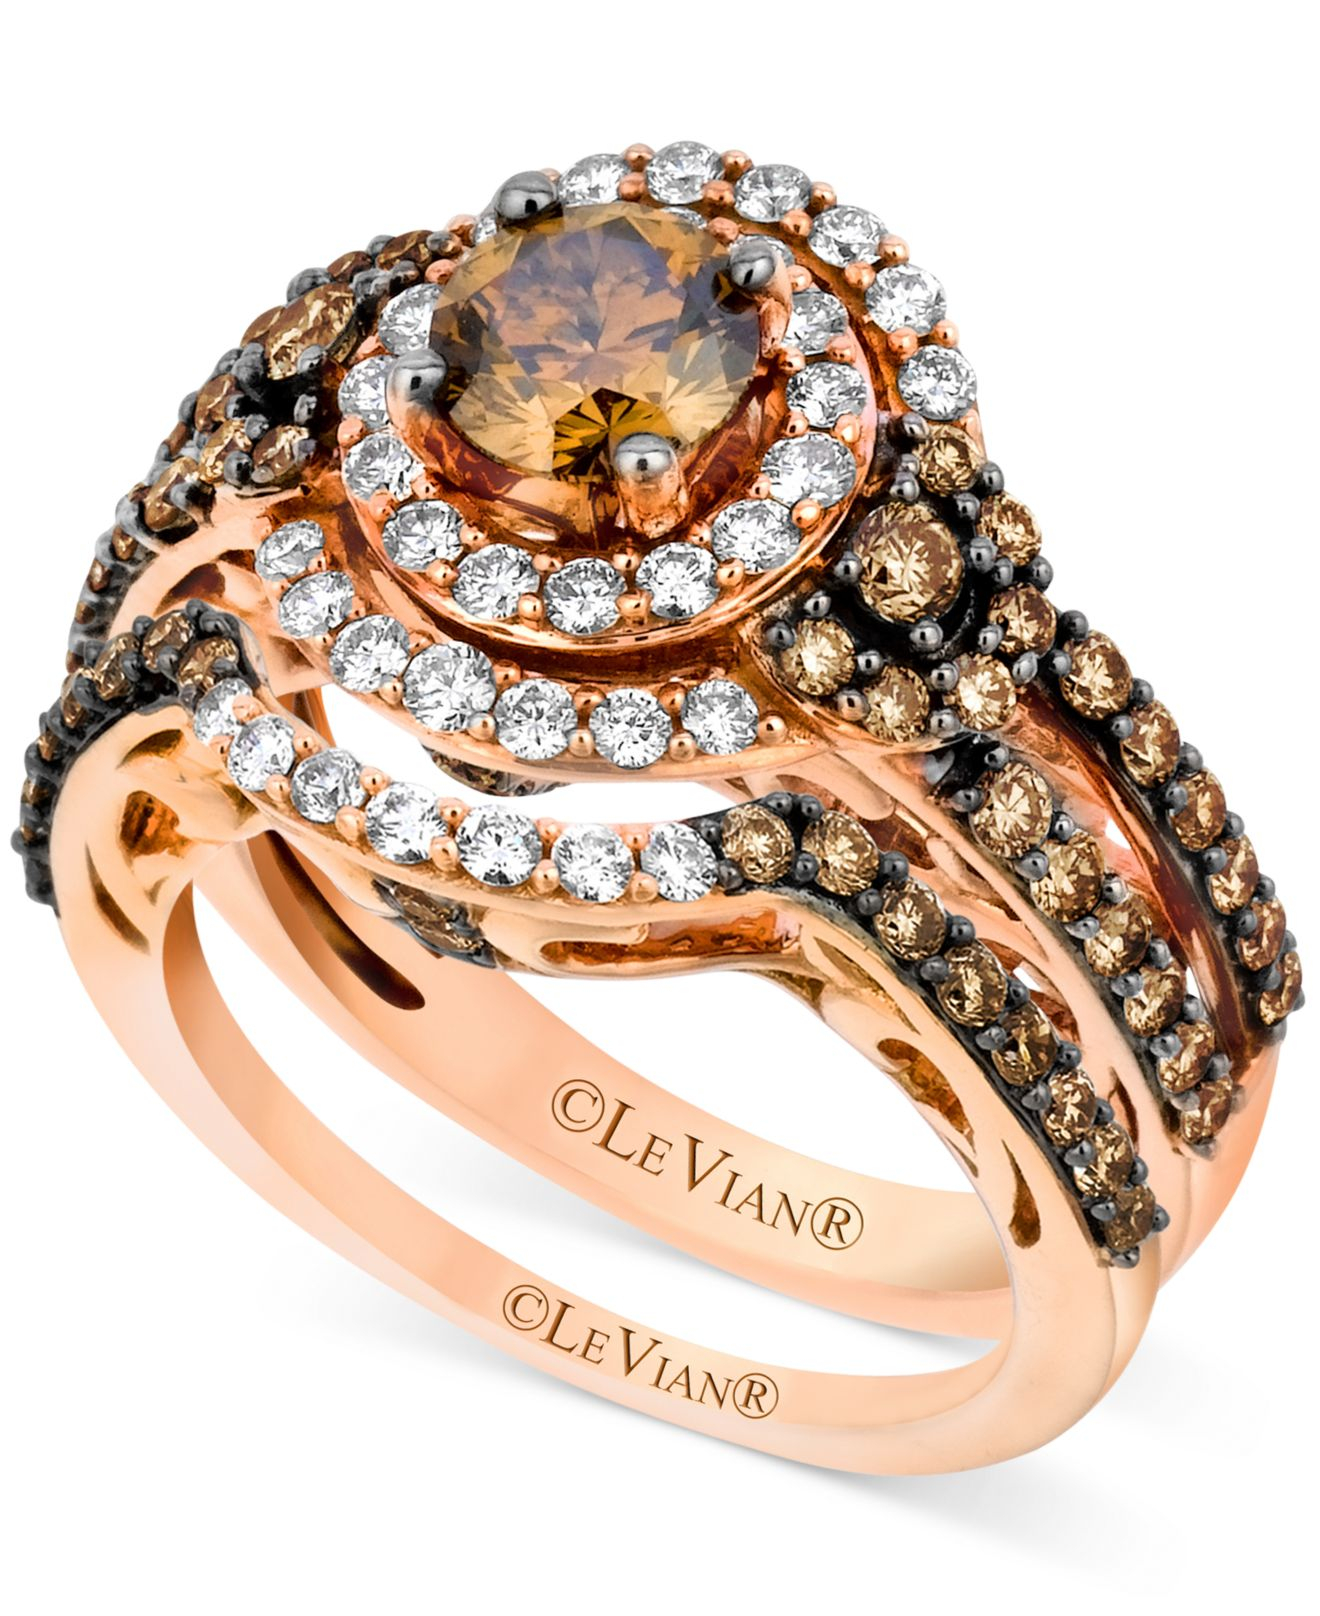 Lyst Le Vian Chocolate Diamond (13/4 Ct. T.w.) And White Diamond (1/2 Ct. T.w.) Ring Set In